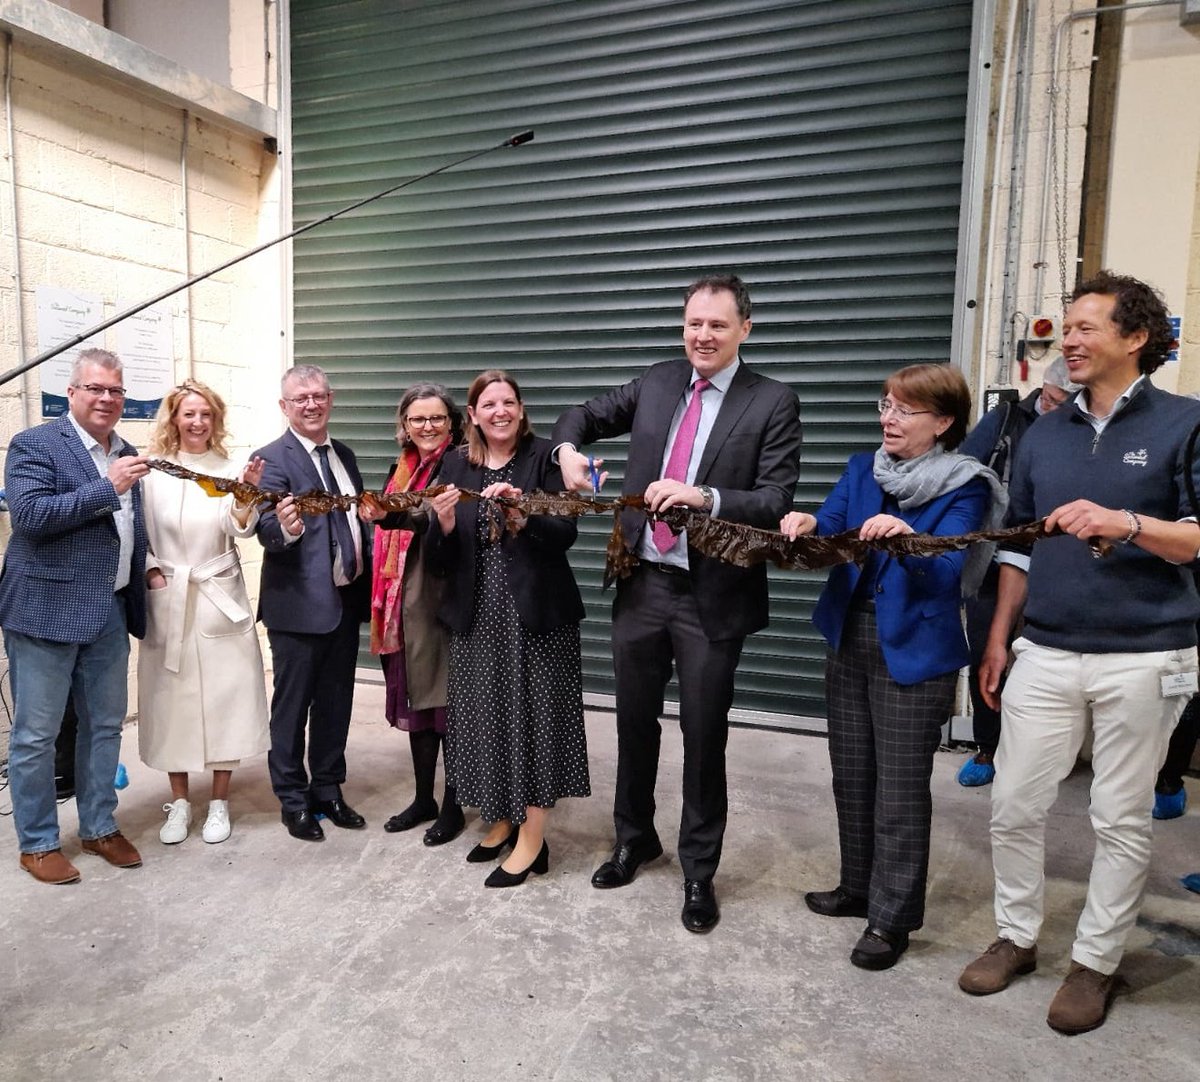 Great to be at @TheSeaweedCo today to mark the opening of its new organic seaweed processing facilities by Minister @McConalogue . Congratulations to Joost, Stefan, Lorraine and the team 👏👏👏 @GillianIOFGA